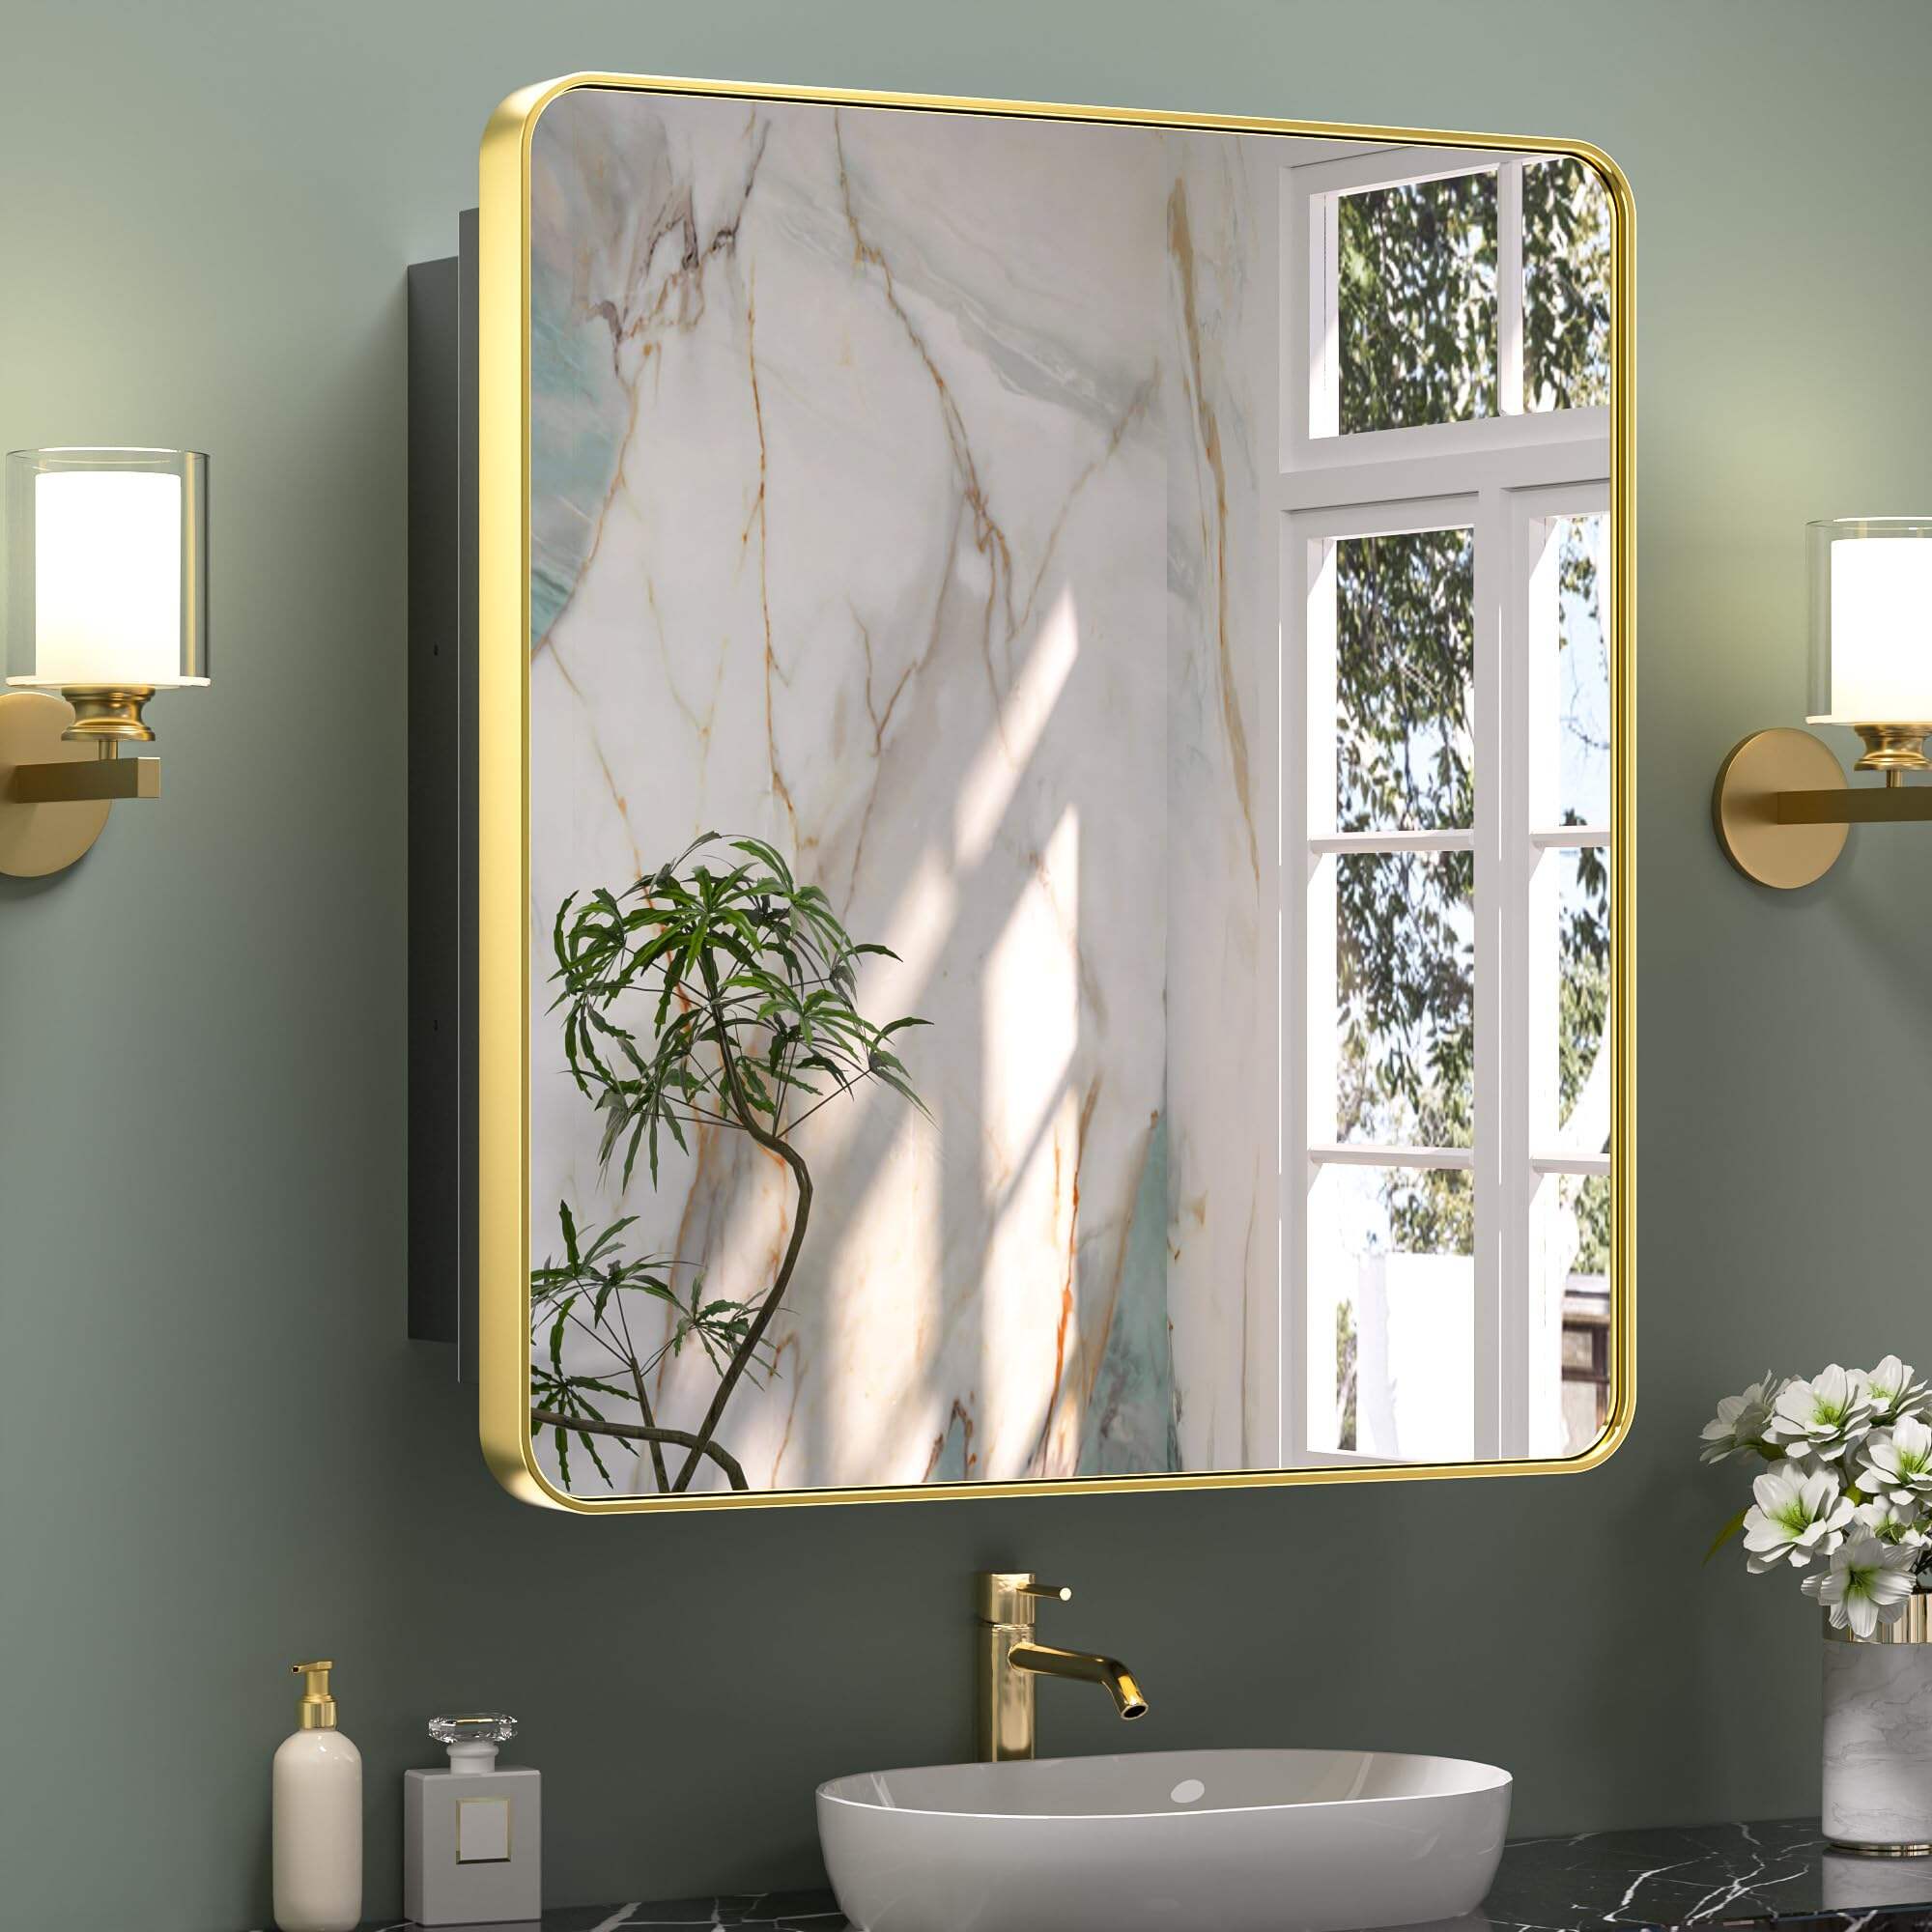 Foshan Haohan Smart Home Co., Ltd. 30 x 32 Inch Mirrored Gold Medicine Cabinets for Bathroom Adjustable Shelves Stainless Steel Framed Single Door Rounded Rectangle Wall Mounted Recessed Bathroom Storage Cabinets with Mirror